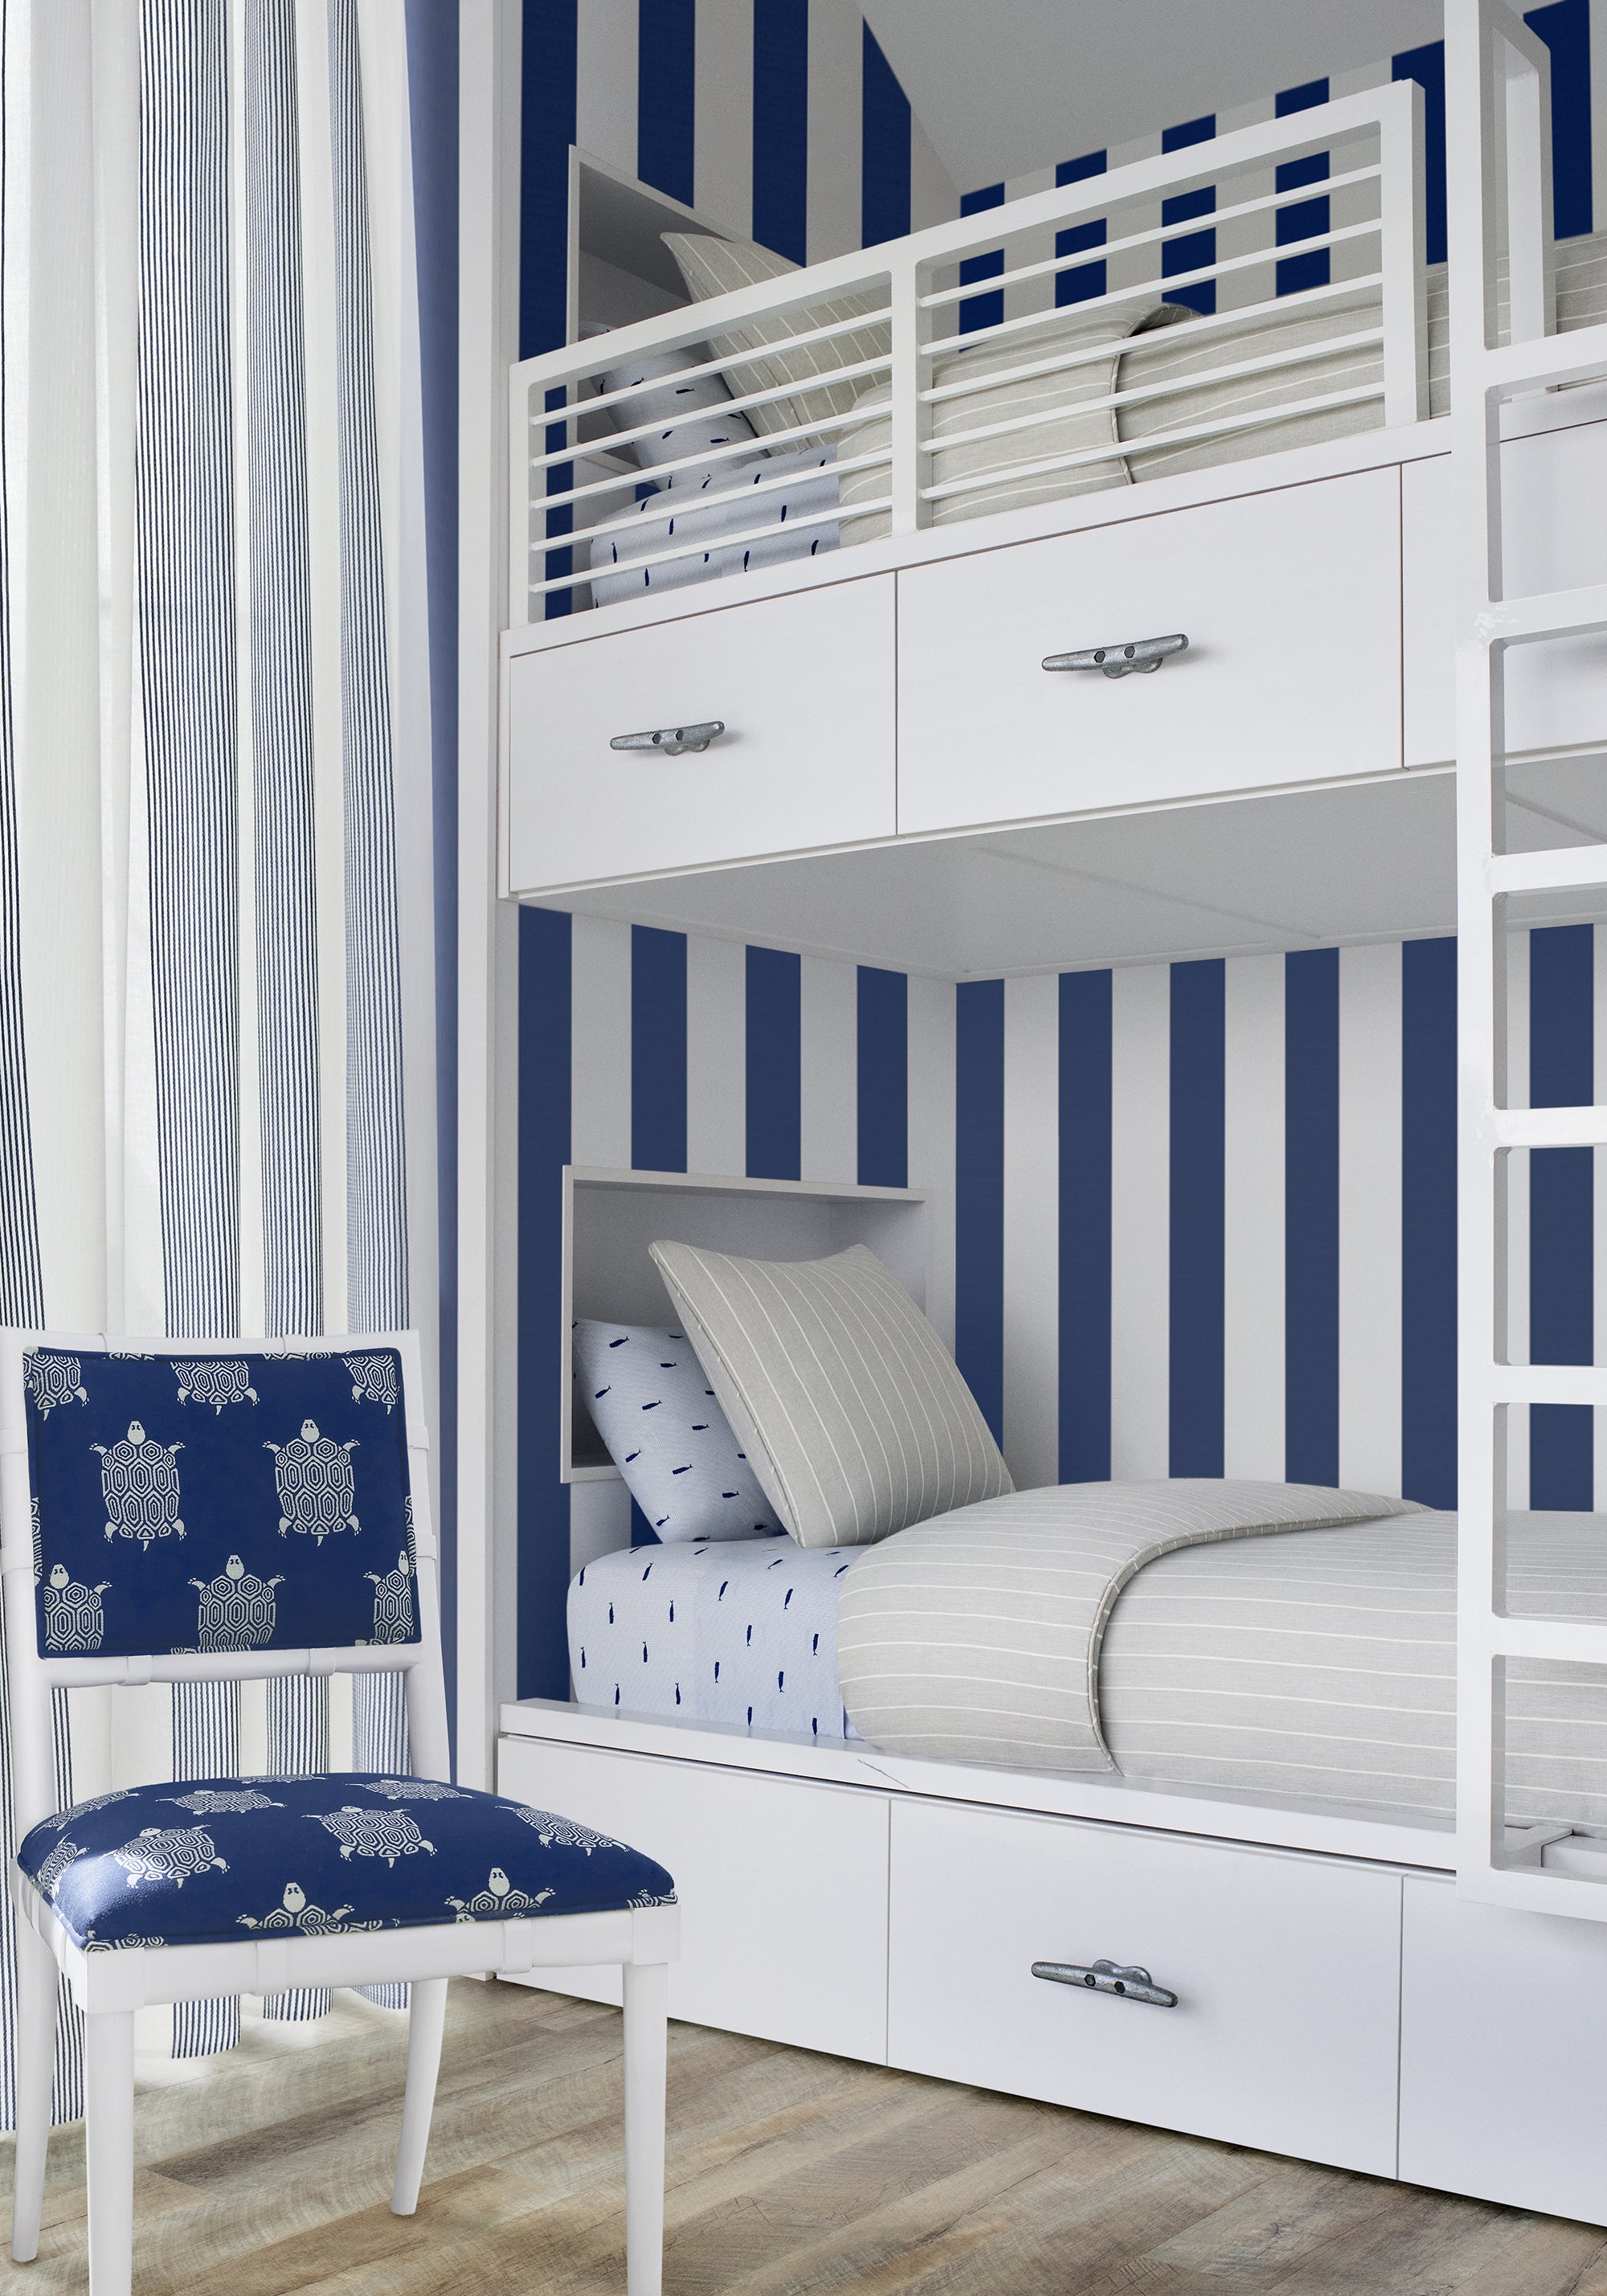 Bedroom with Sabine fabric in stripe oxford blue color - pattern number FWW81736 - by Thibaut fabrics